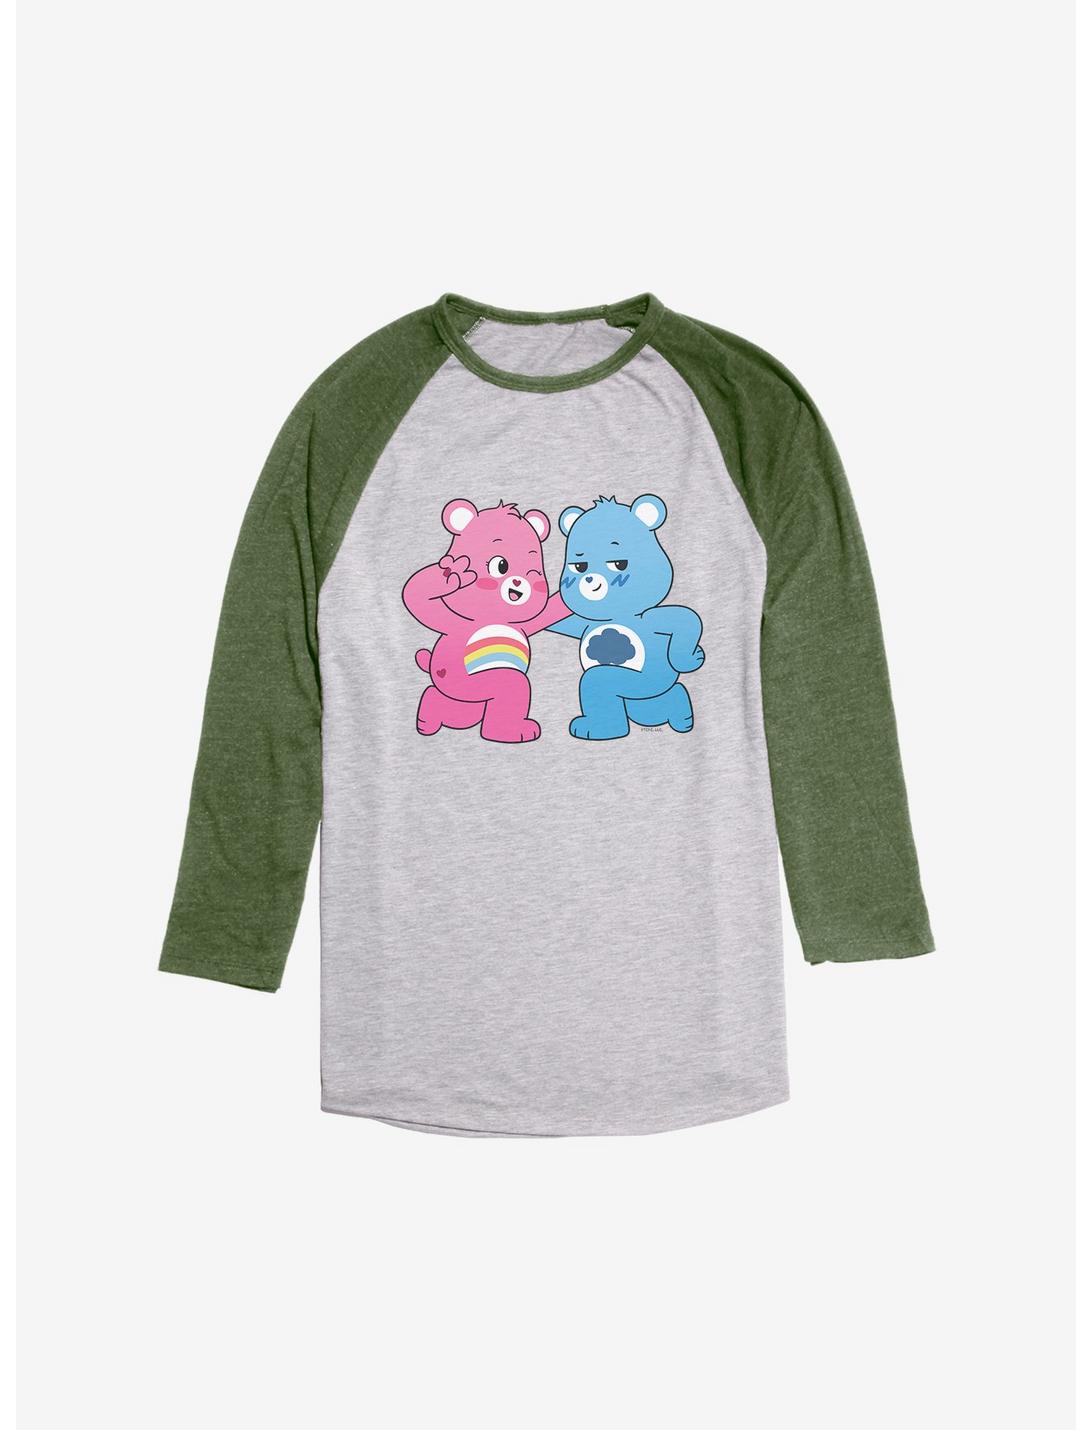 Care Bears Cheer and Grumpy Cool Raglan, Ath Heather With Moss, hi-res